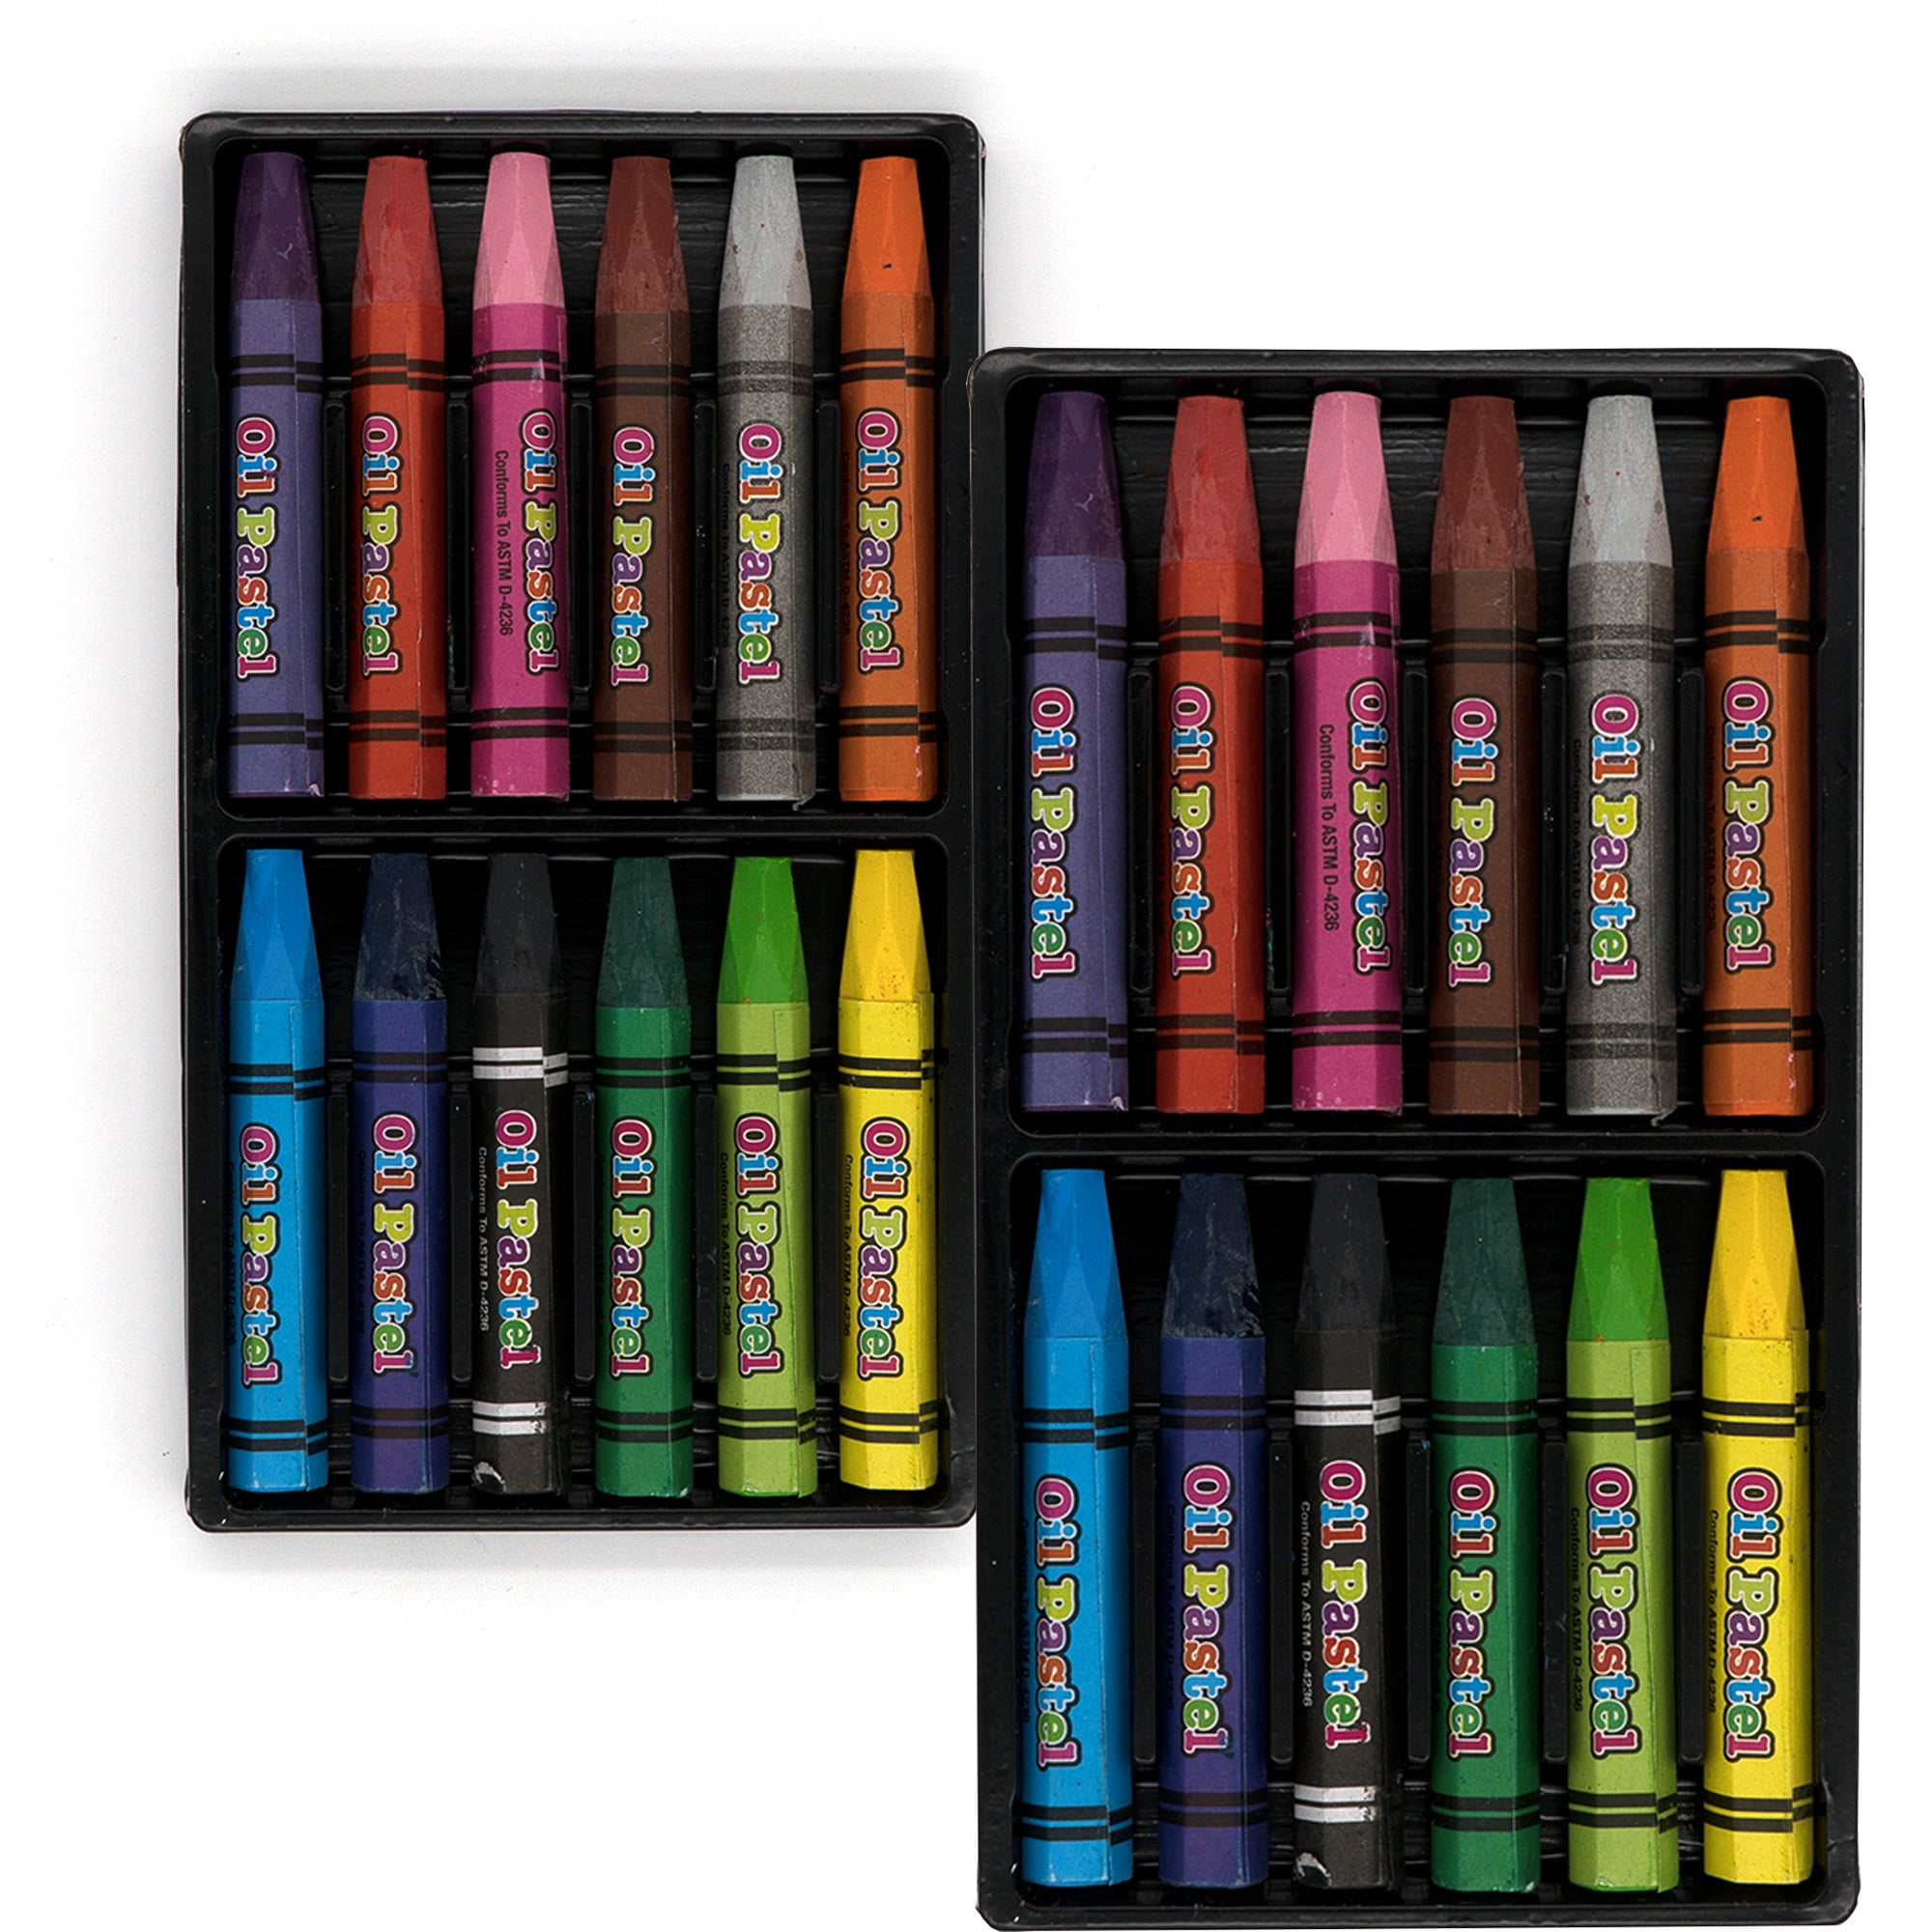 Wholesale Markers Arrtx 72 Vivid Colors Soft Oil Pastel Pencils  Professional Oil Pastel Crayons For Drawing Artist Art Supplies 230719 From  Yao10, $42.21